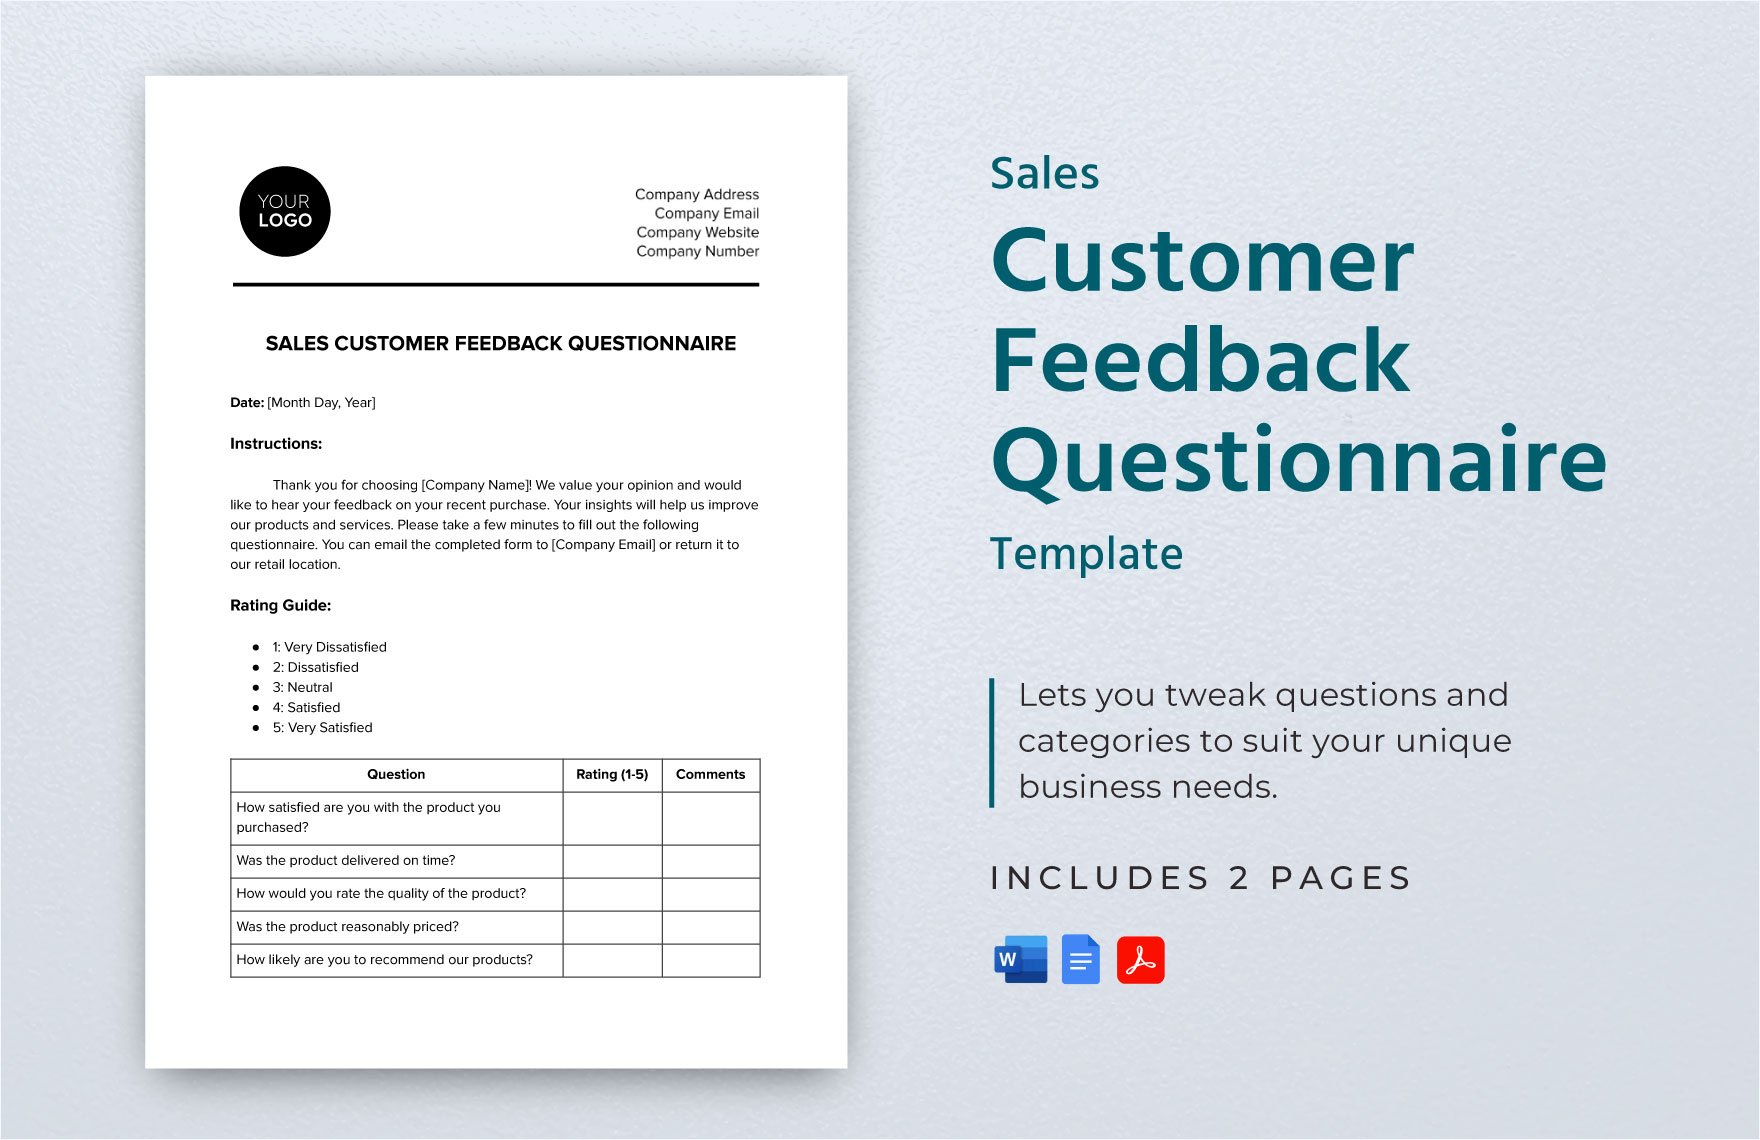 Sales Customer Feedback Questionnaire Template in Word, Google Docs, PDF